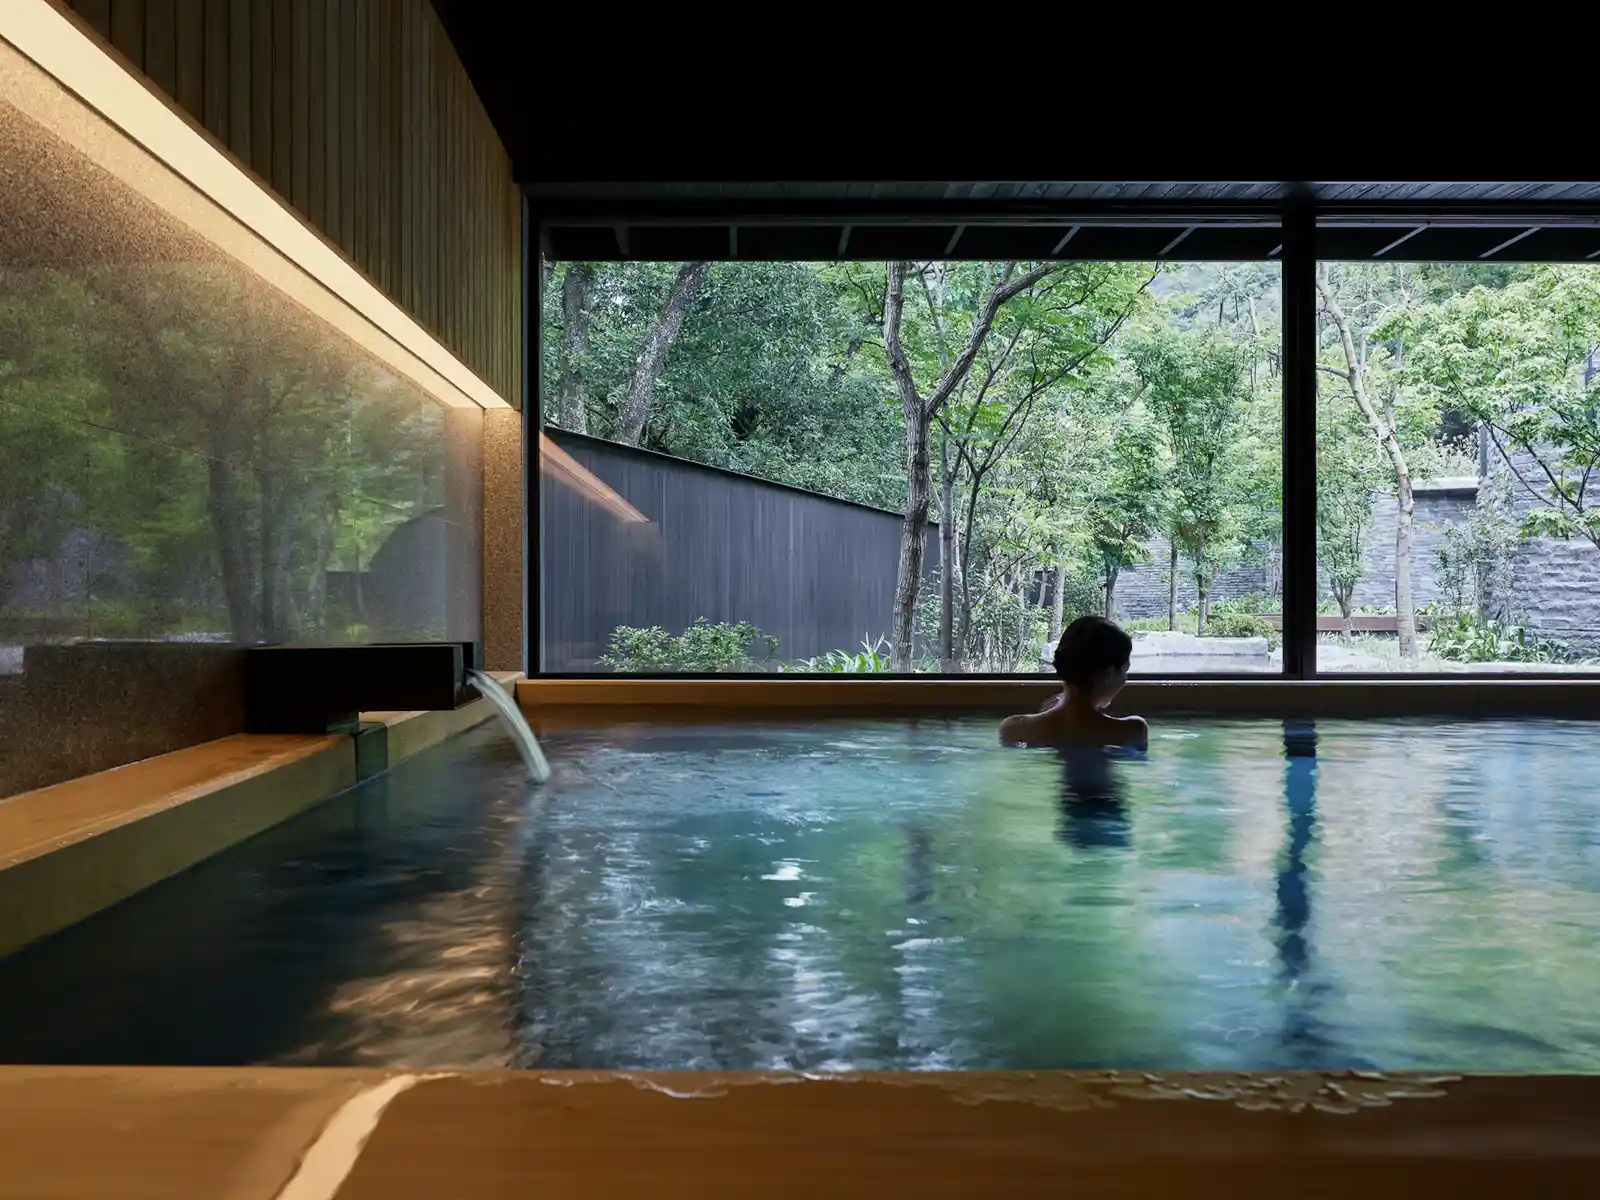 A tourist soaks in an indoor pool at the luxury Hoshinoya hot spring resort.